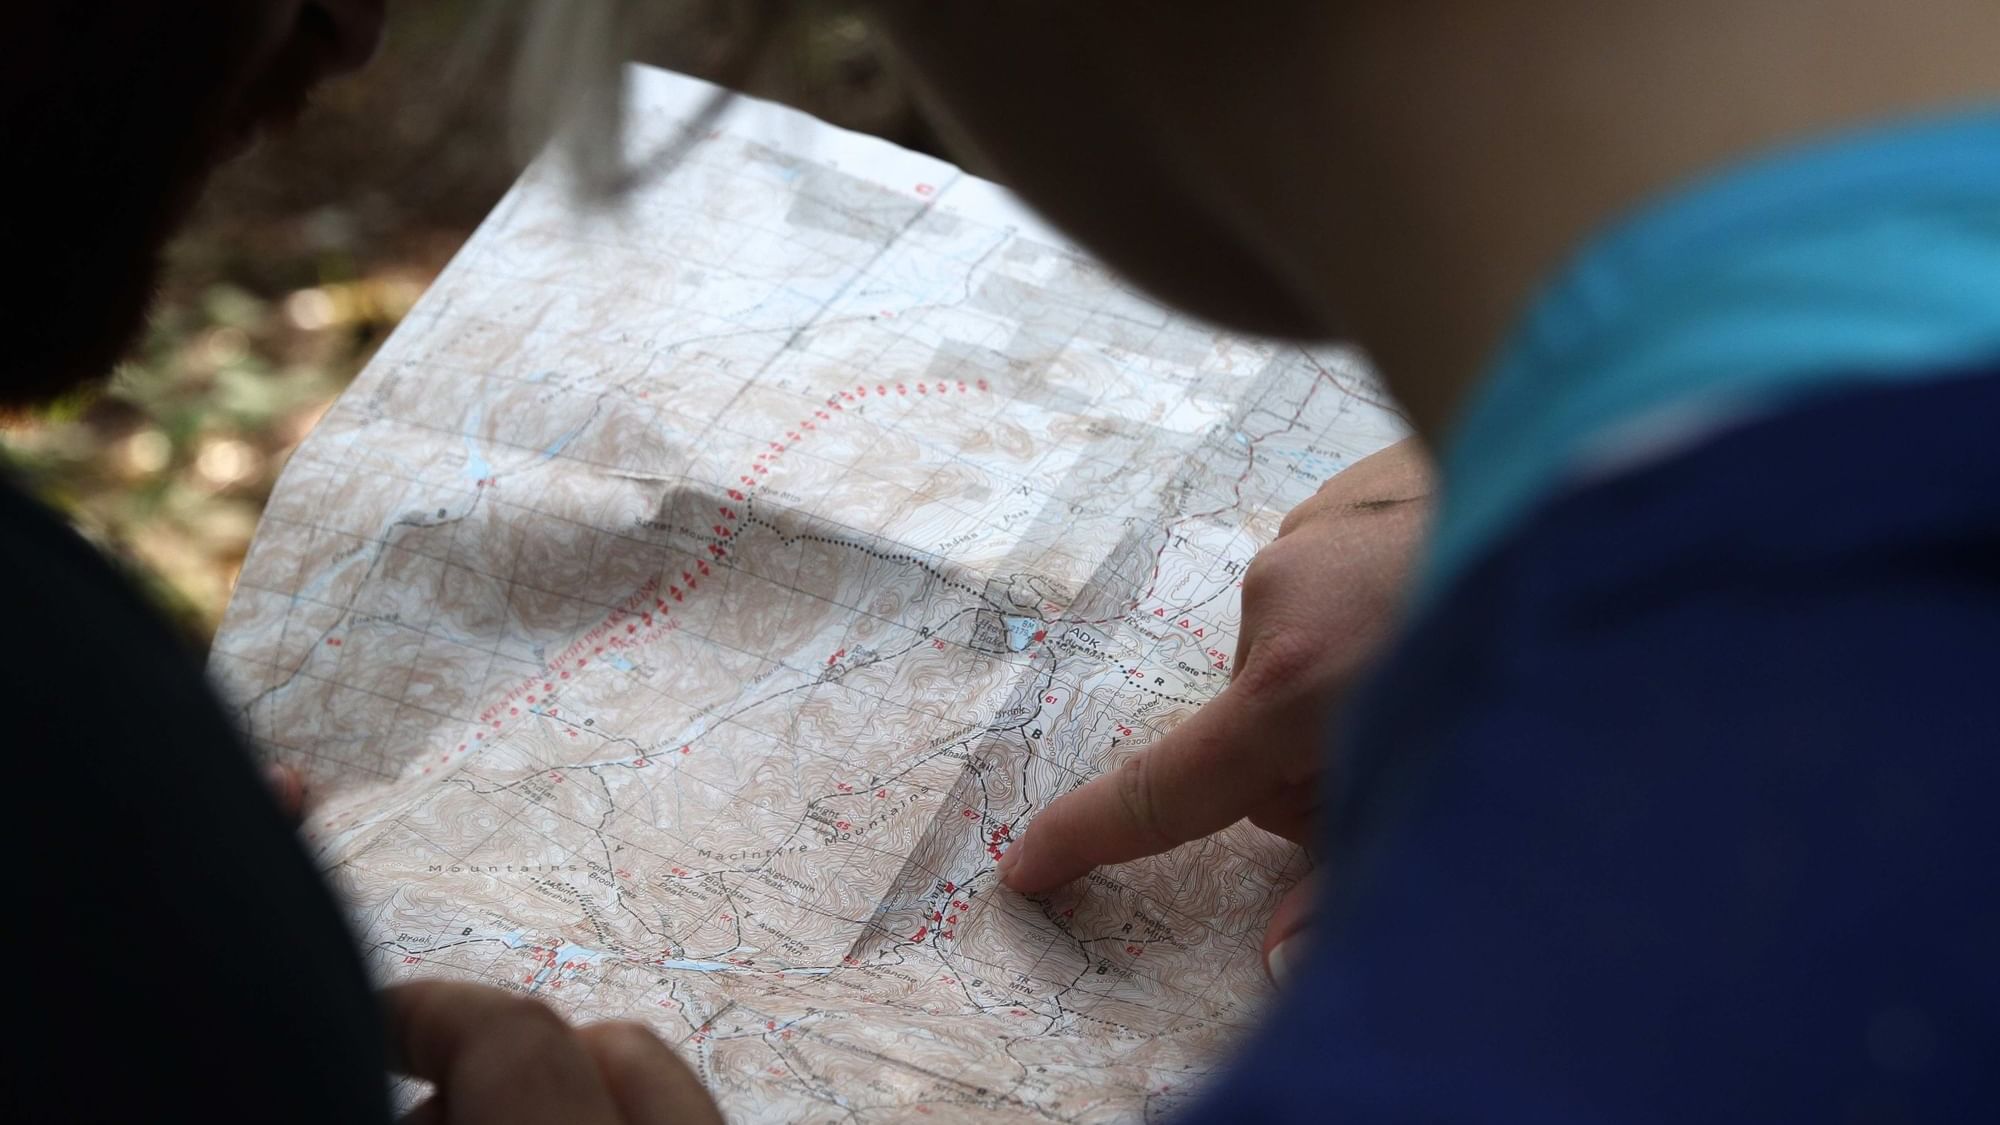 A man Searching location using the map at The Original Hotels